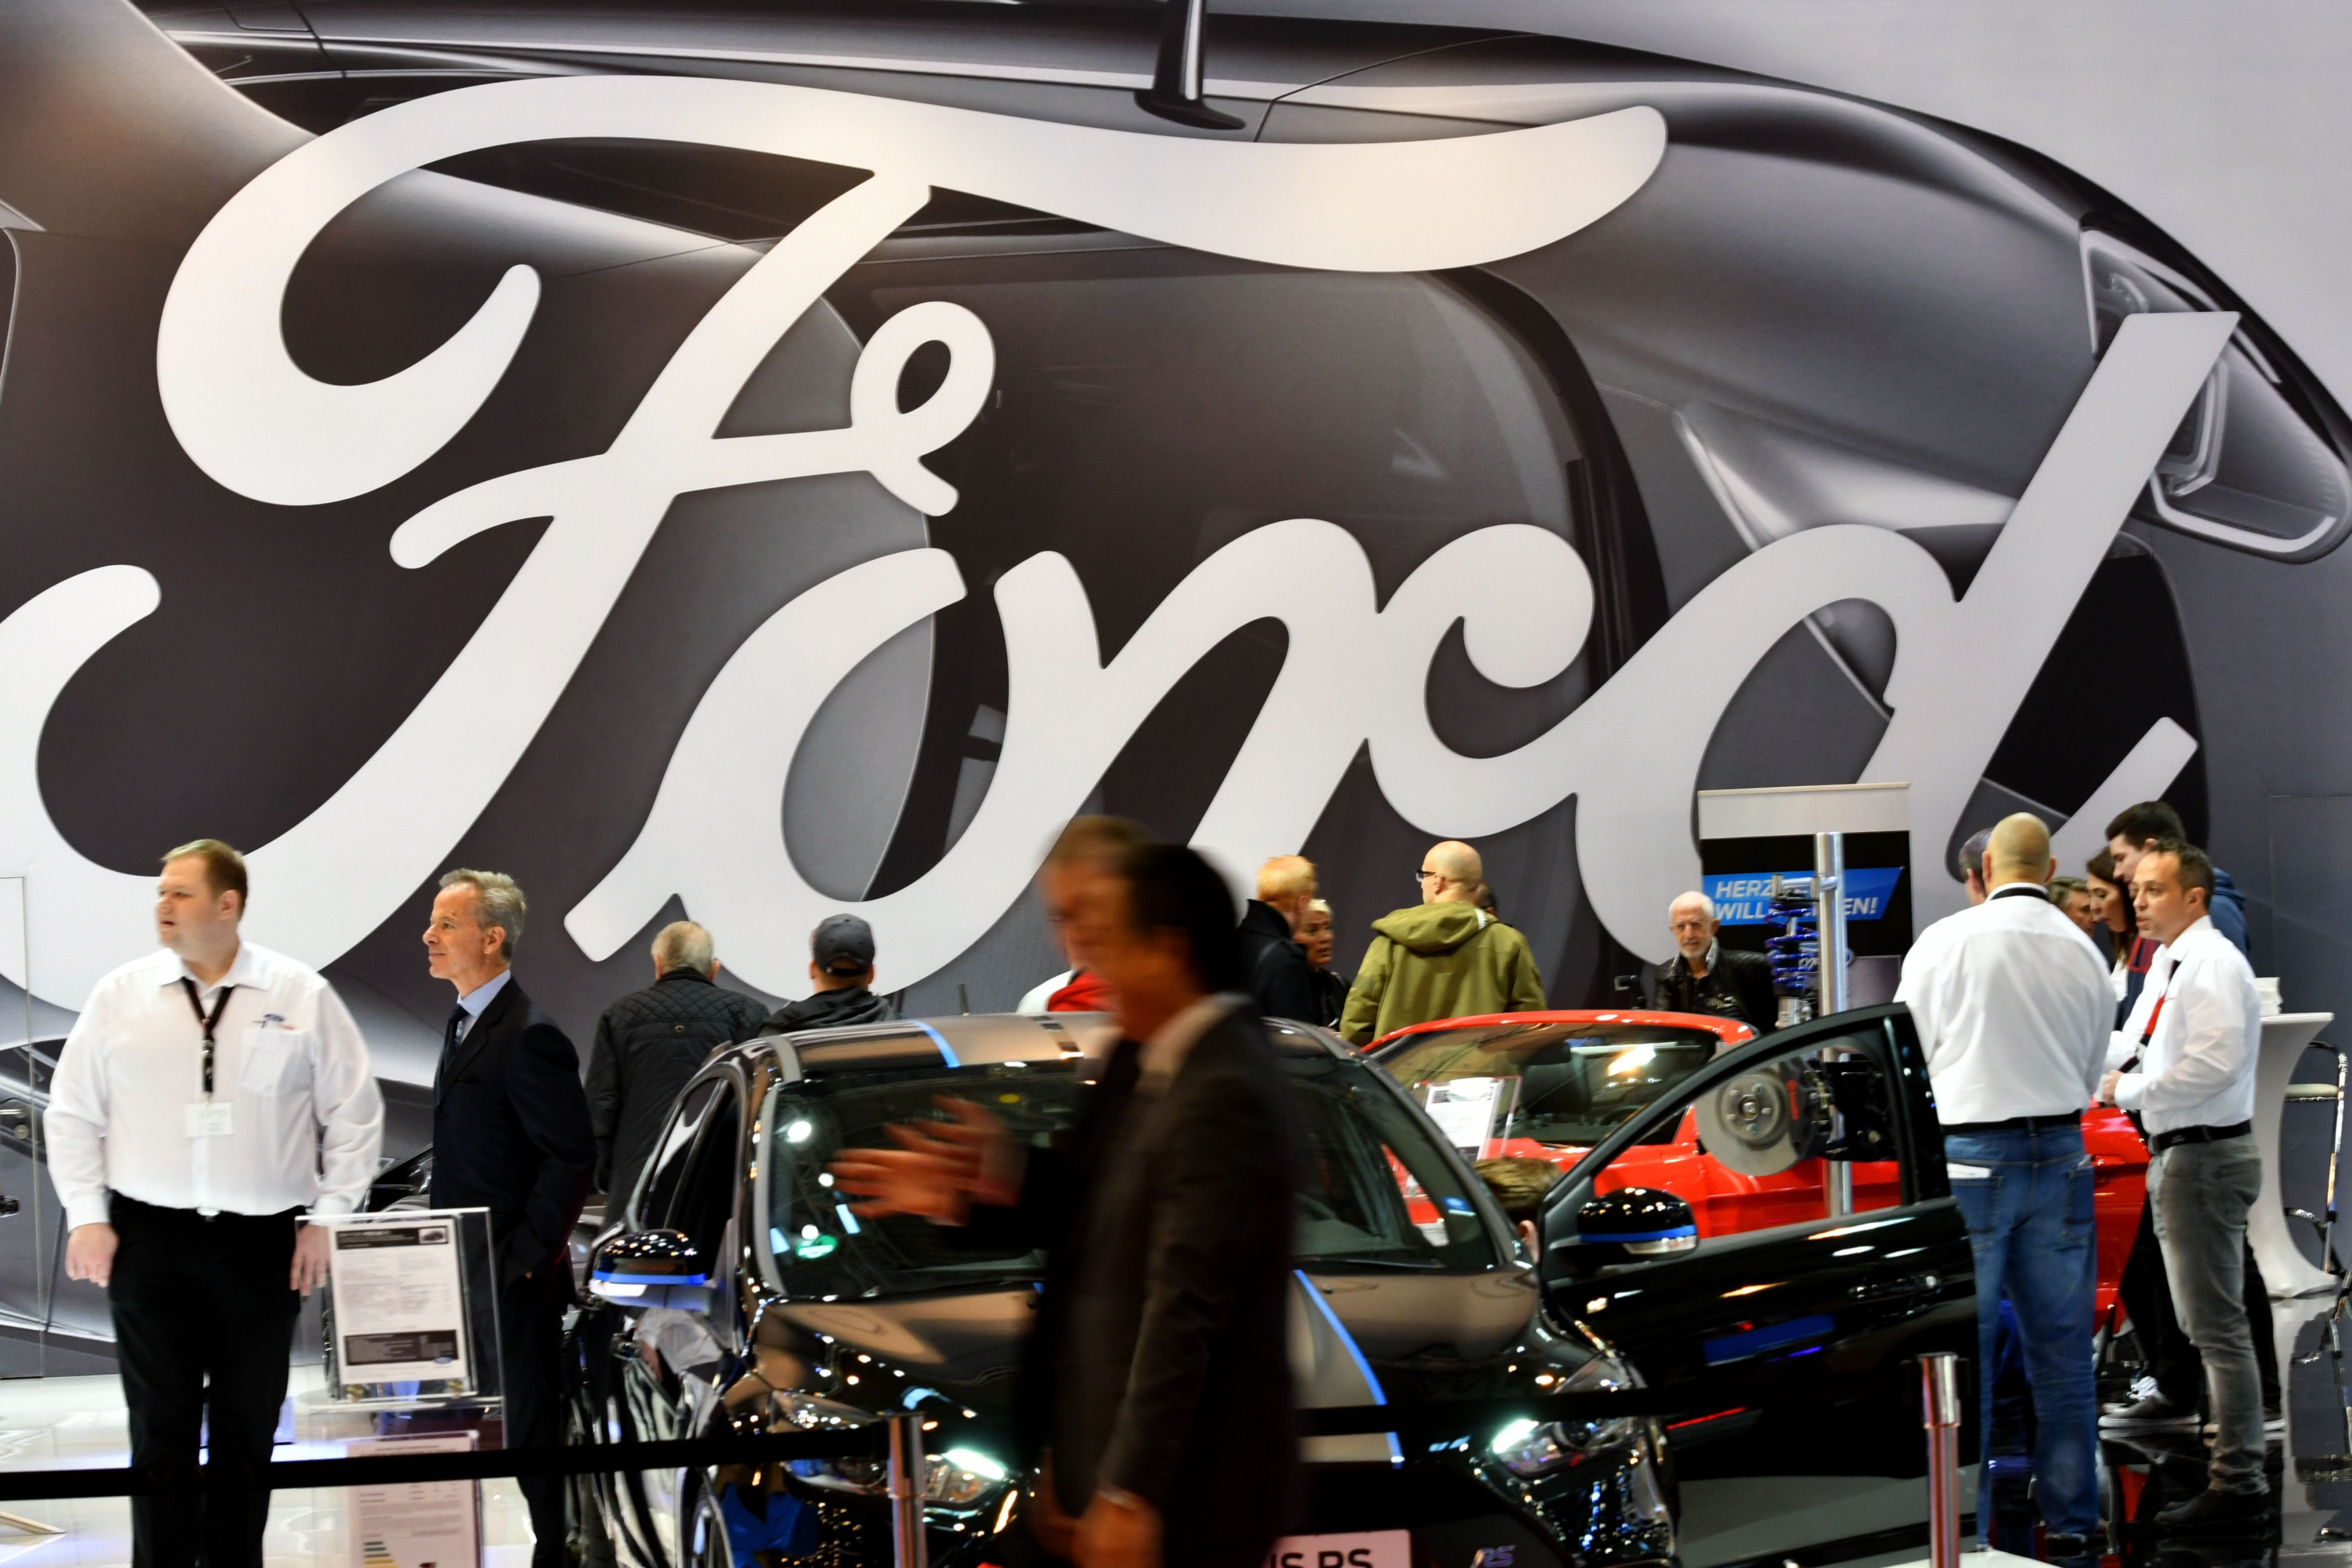 Visitors are seen at the stand of car maker Ford during the 'Essen Motor Show' fair in Essen, western Germany, on December 1, 2017.)